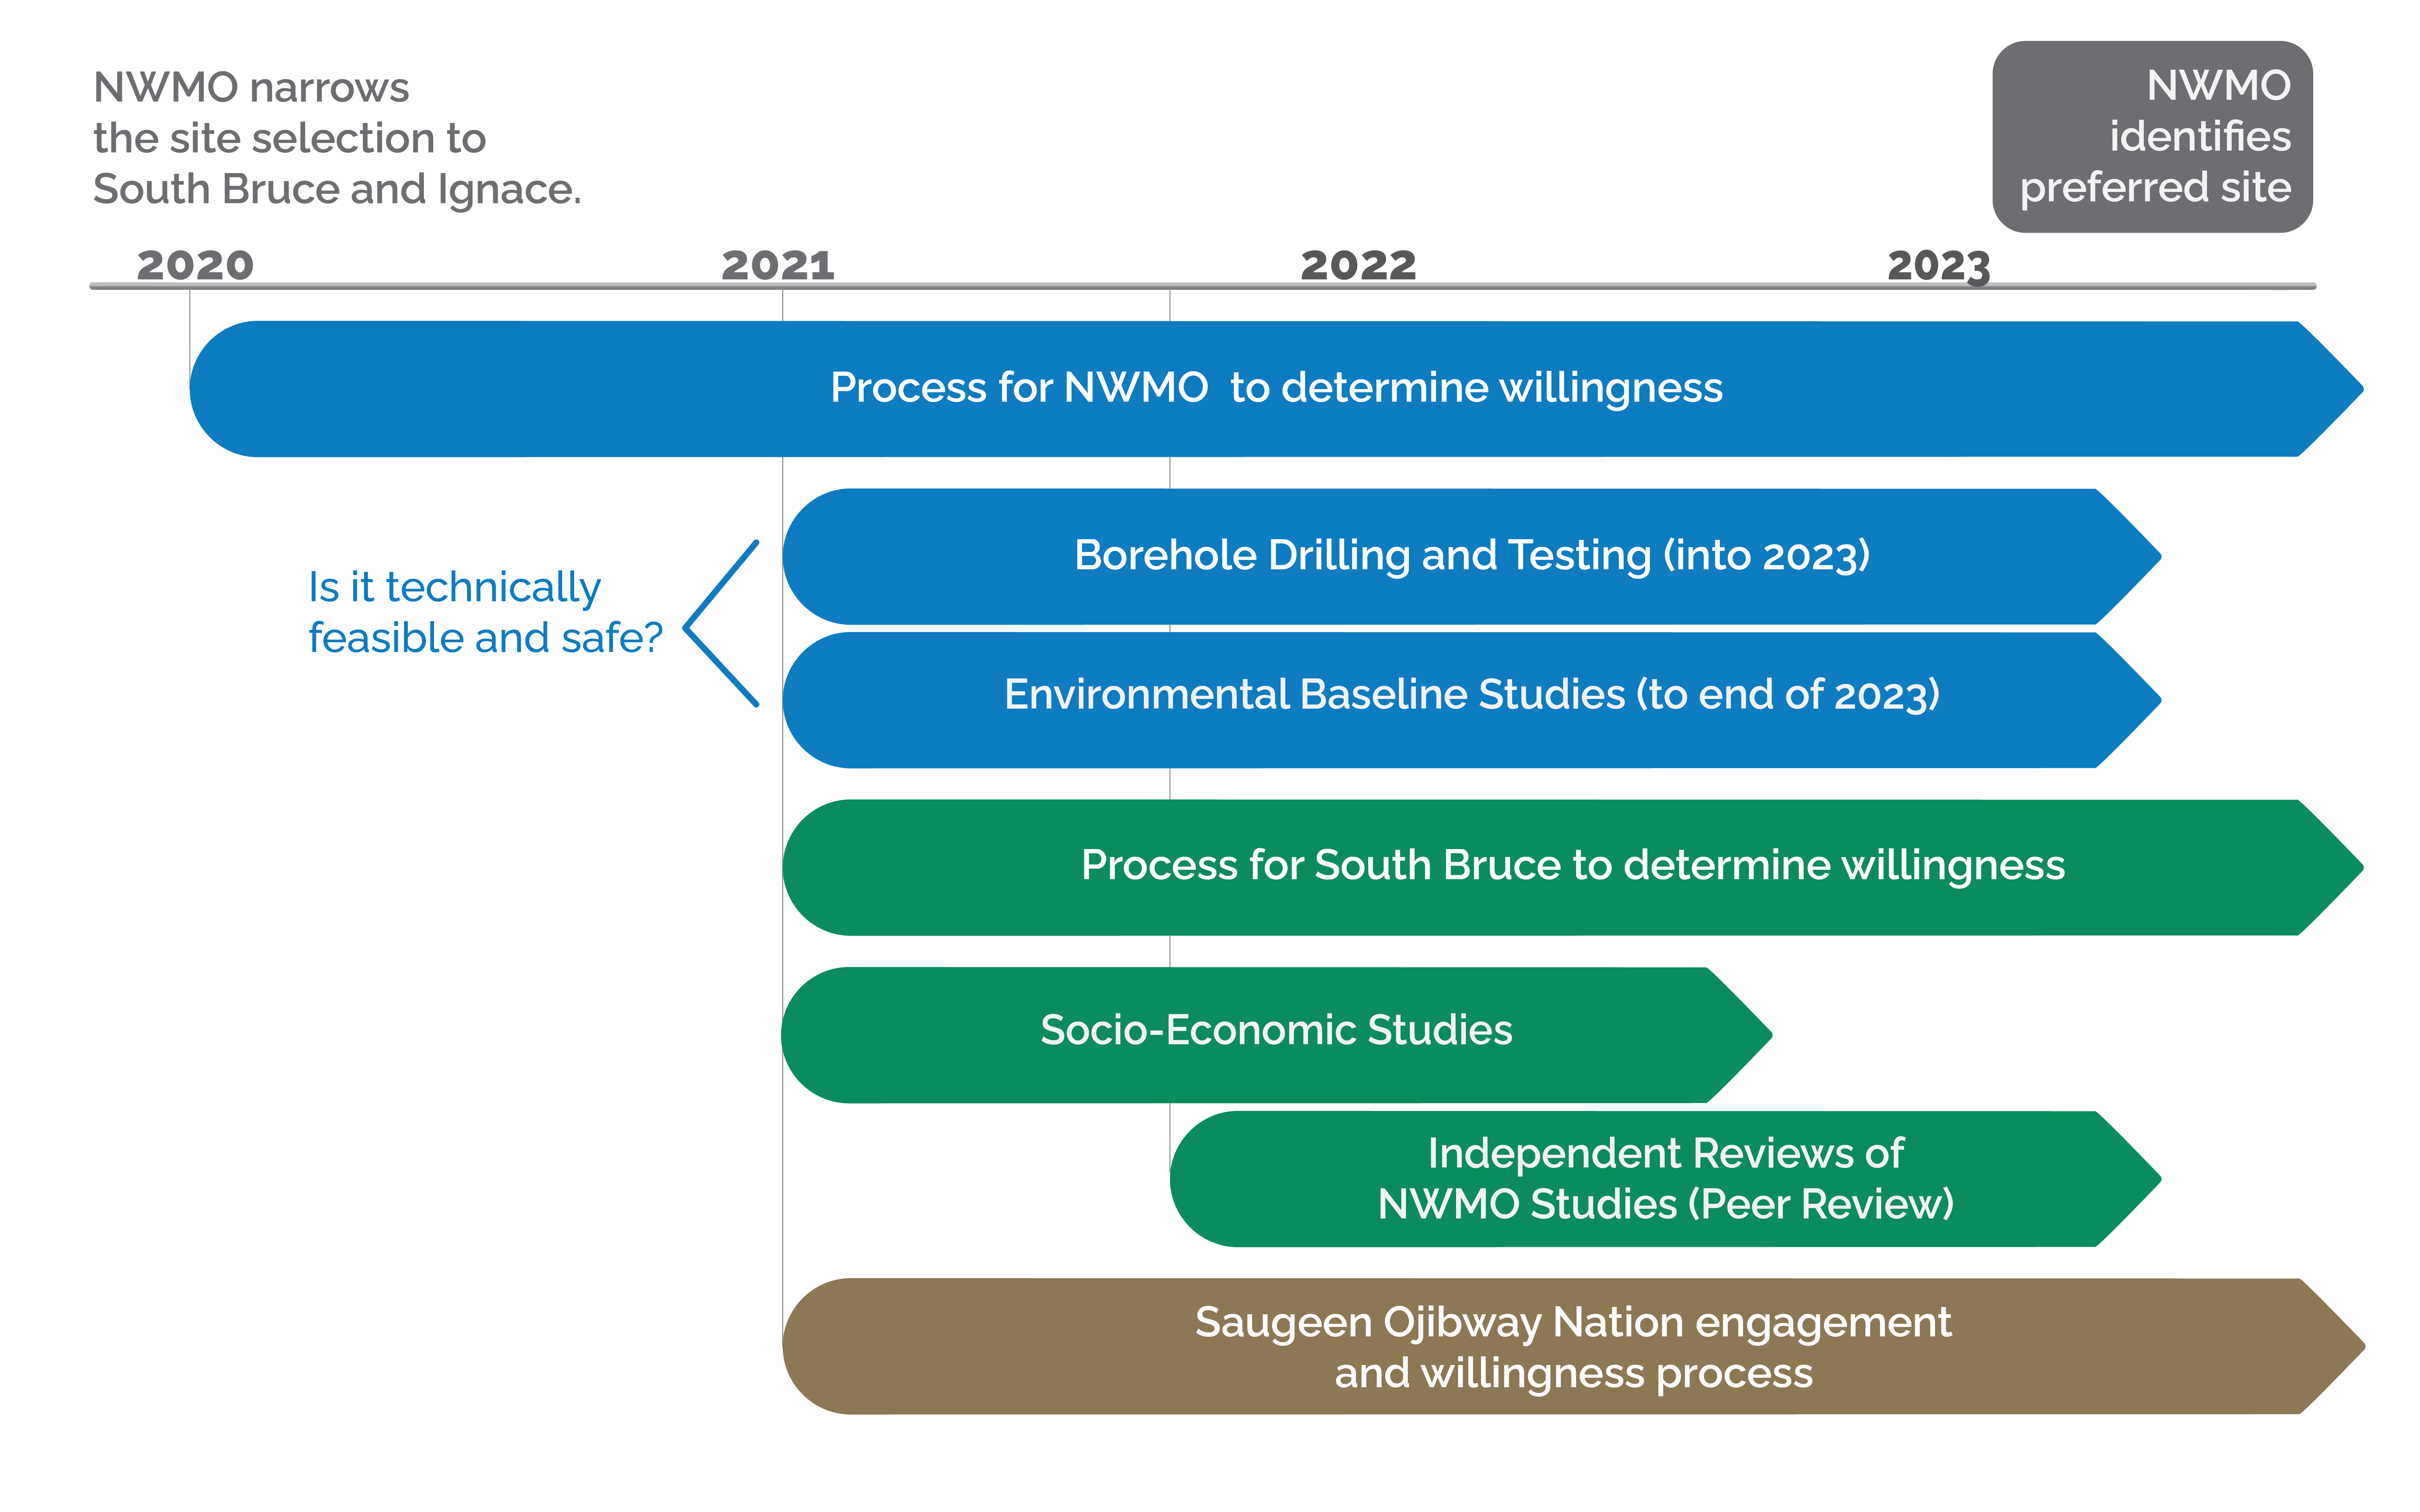 Timeline of key studies, as well as the willingness processes taking place, leading up to the selection of a site for the NWMO Project to store Canada’s used nuclear fuel.